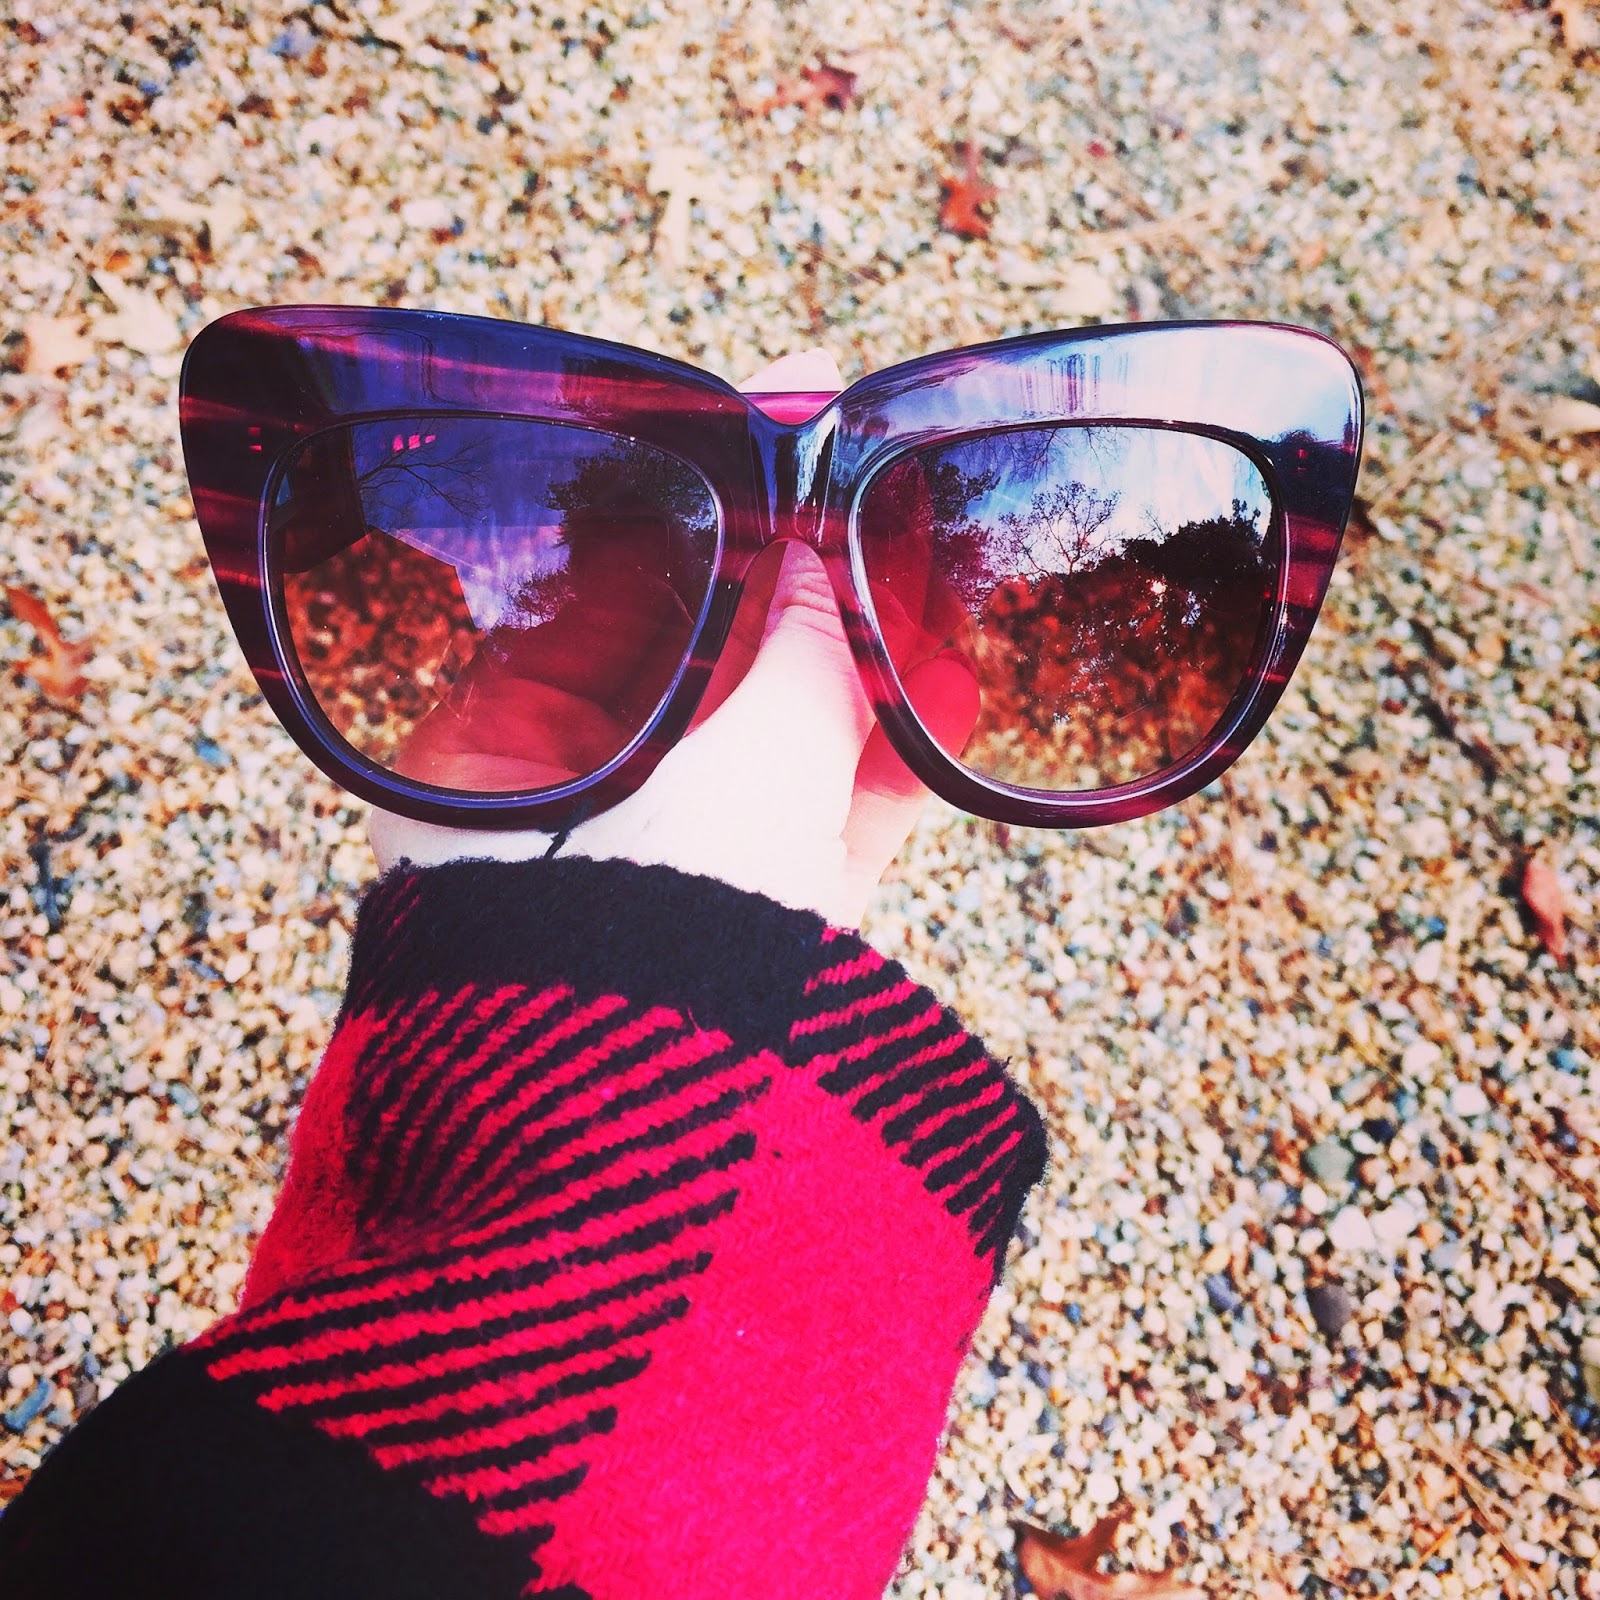 Sunglasses of the Day: House of Harlow 1960